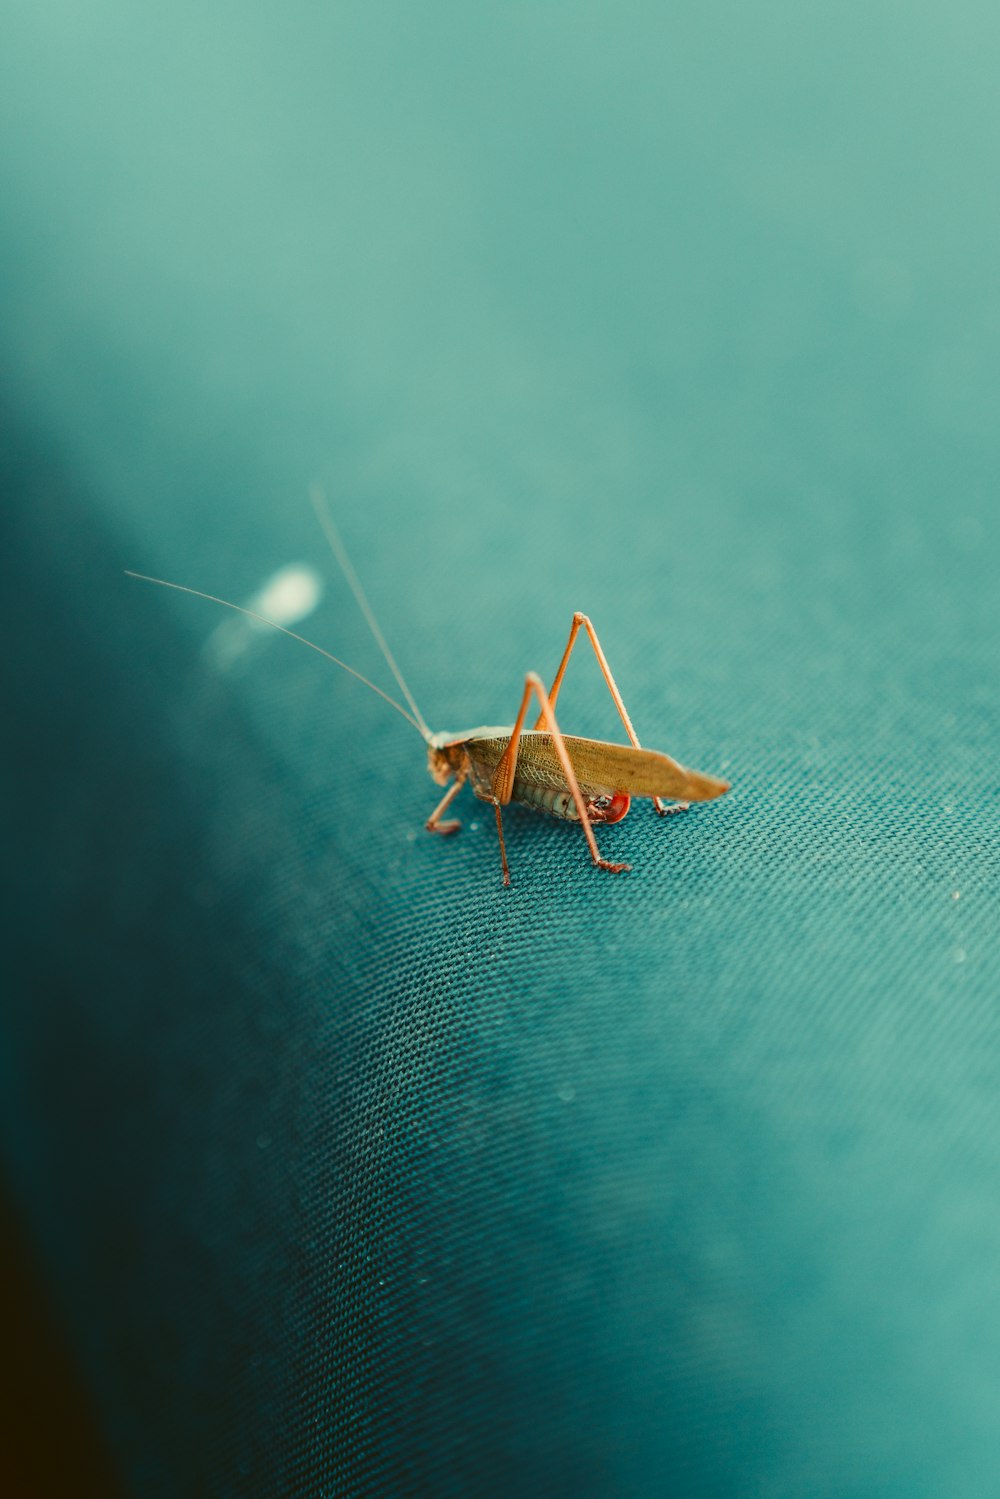 a close up of a grasshopper on a blue surface